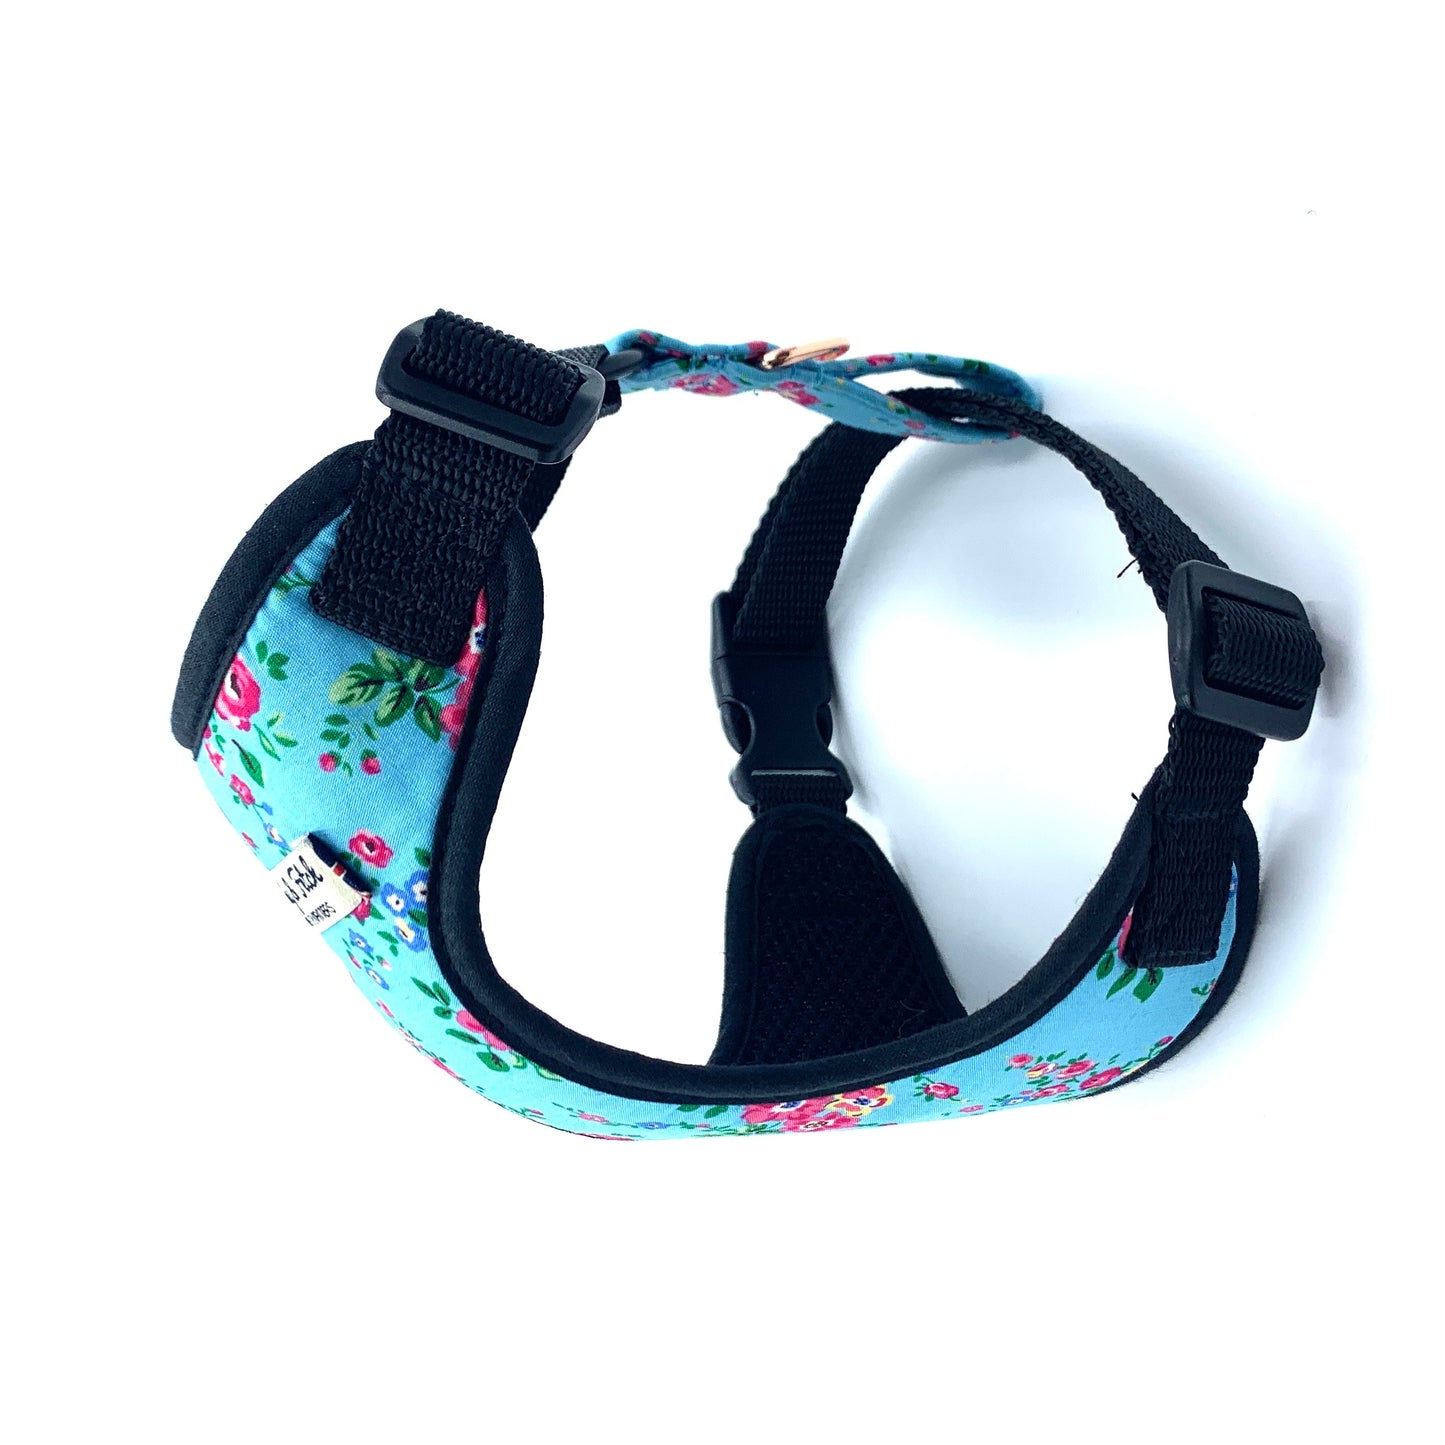 Blue Ditsy Floral Fabric Harness